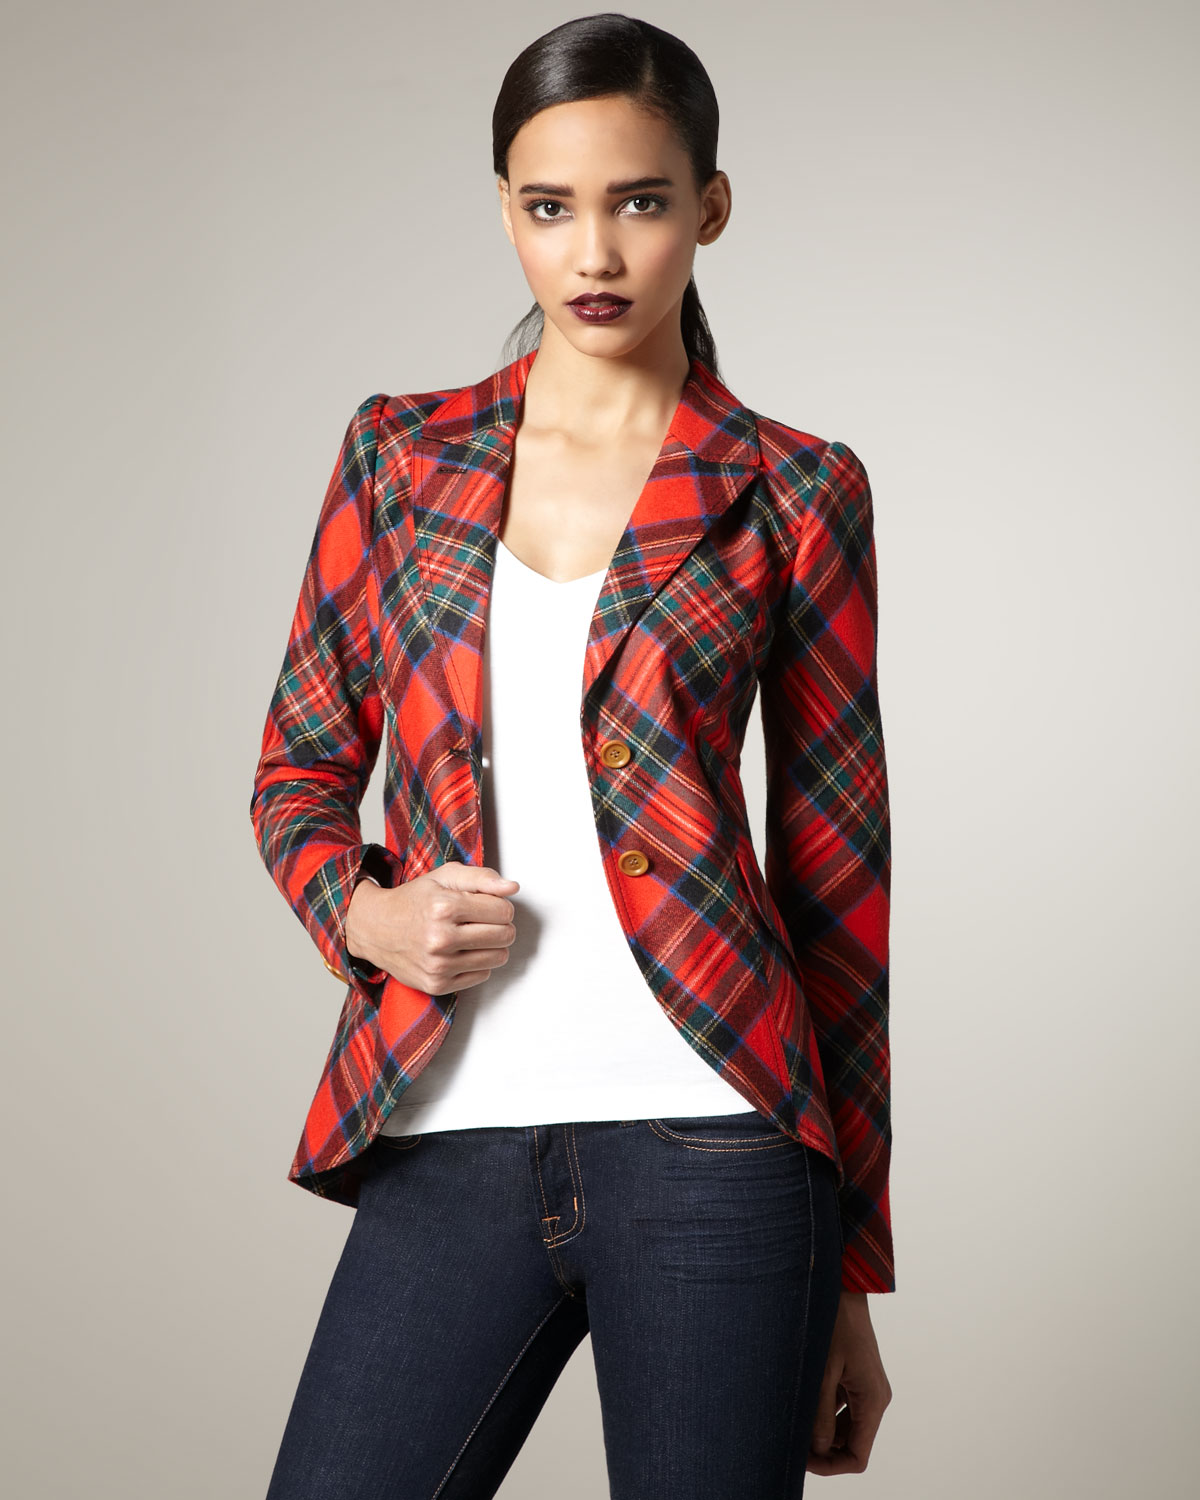 Graduation tweed jacket with elbow patches for women pictures from yepme